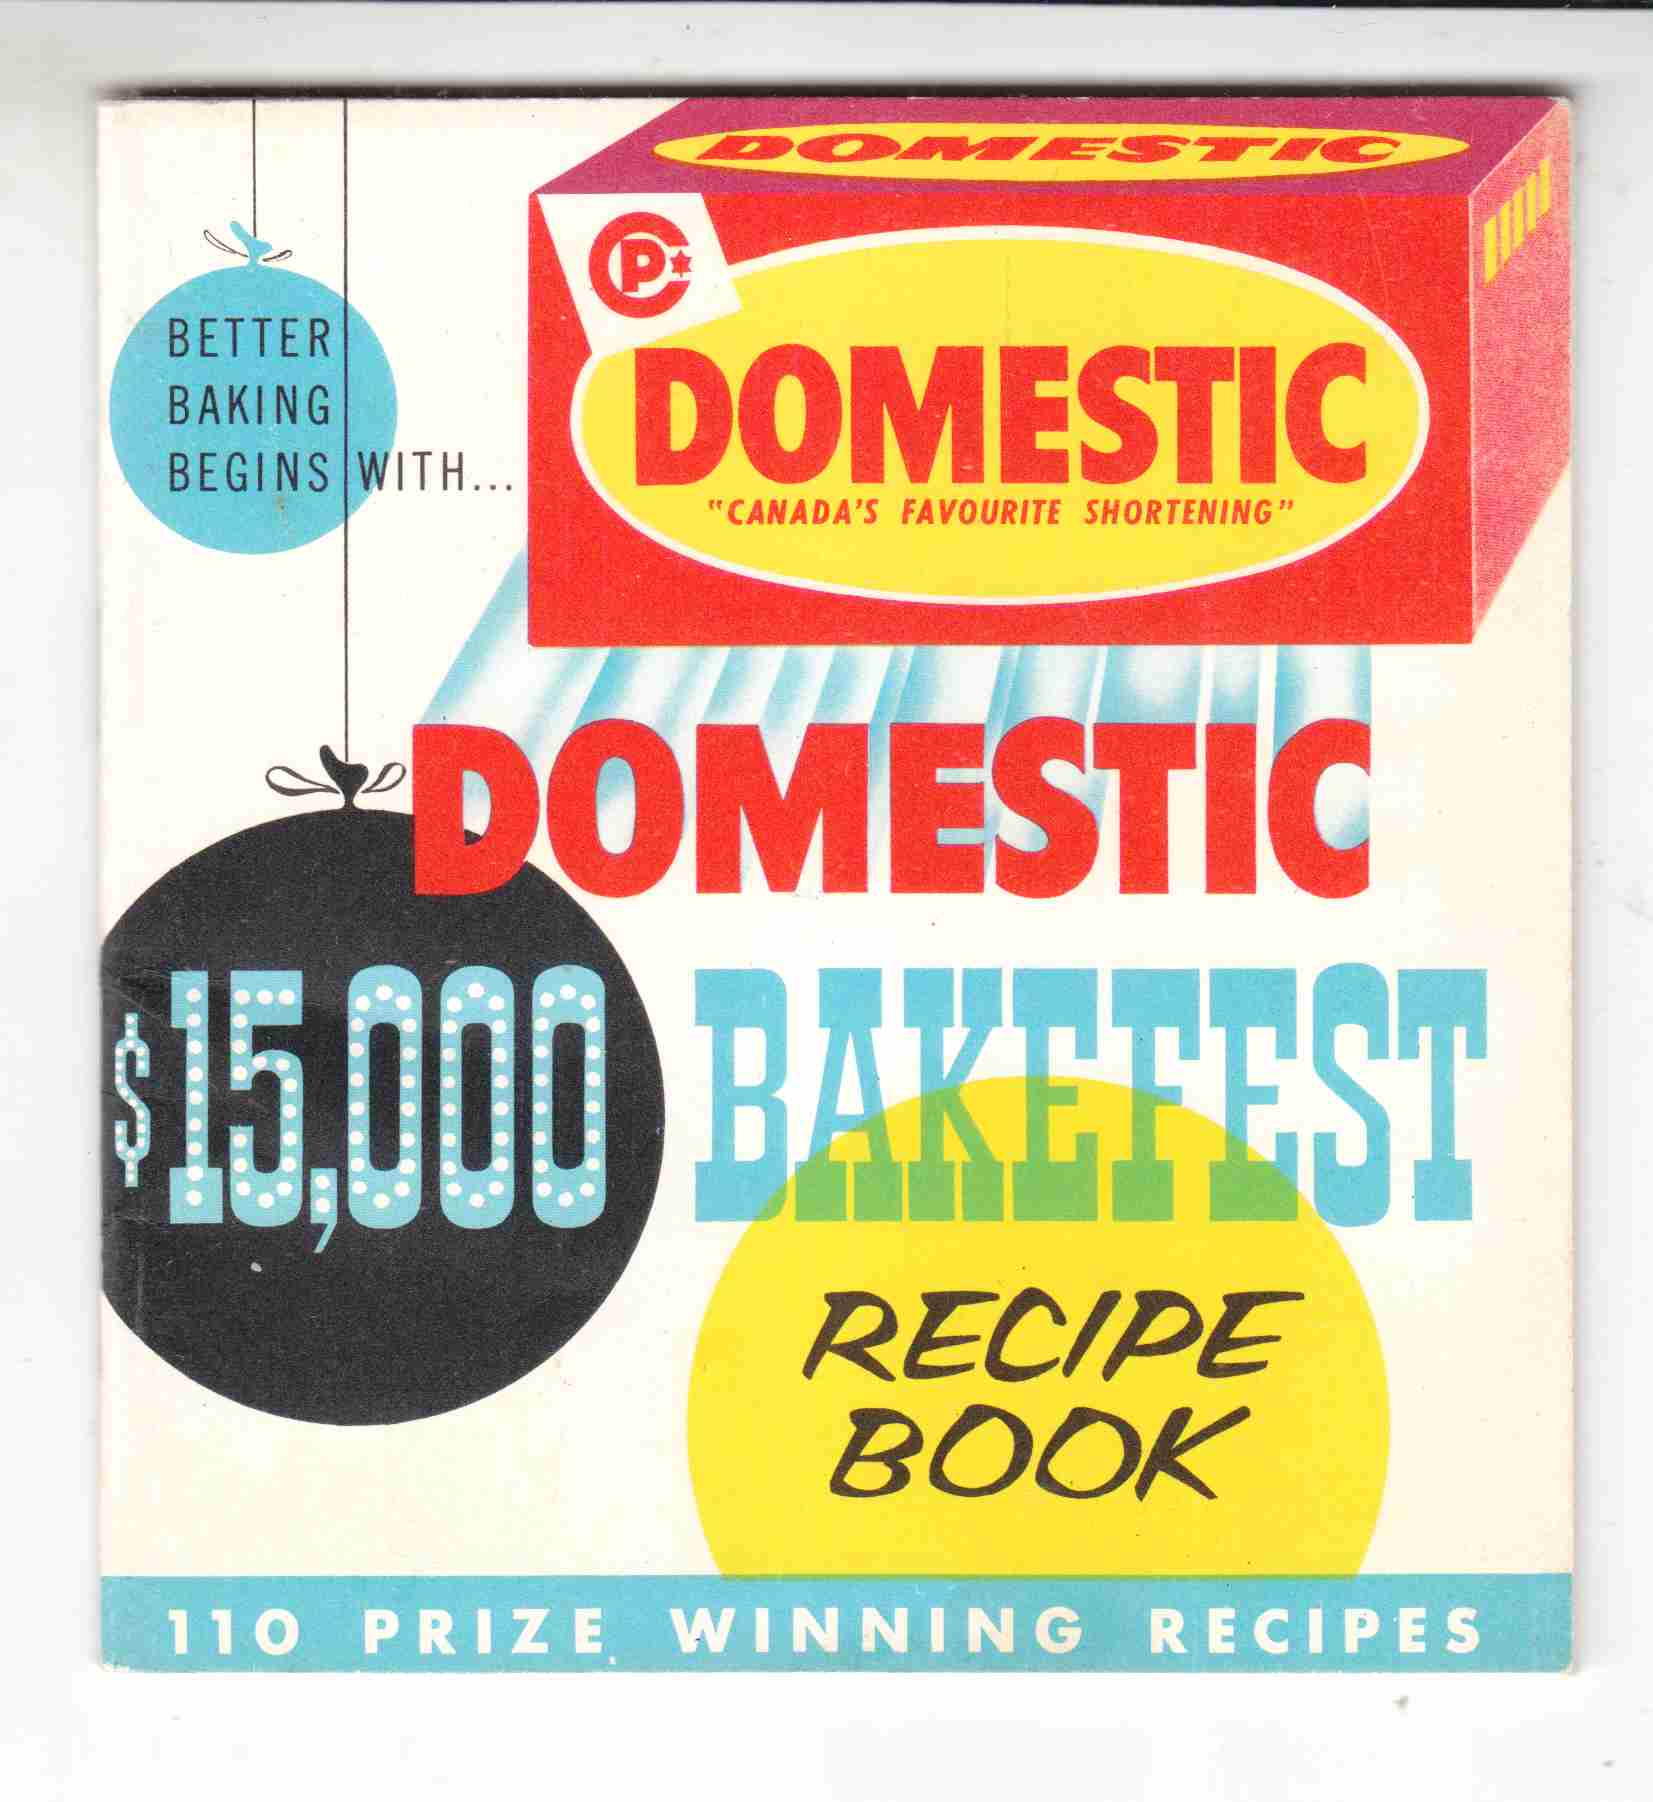 Image for Domestic $15000 Bakefest Recipe Book